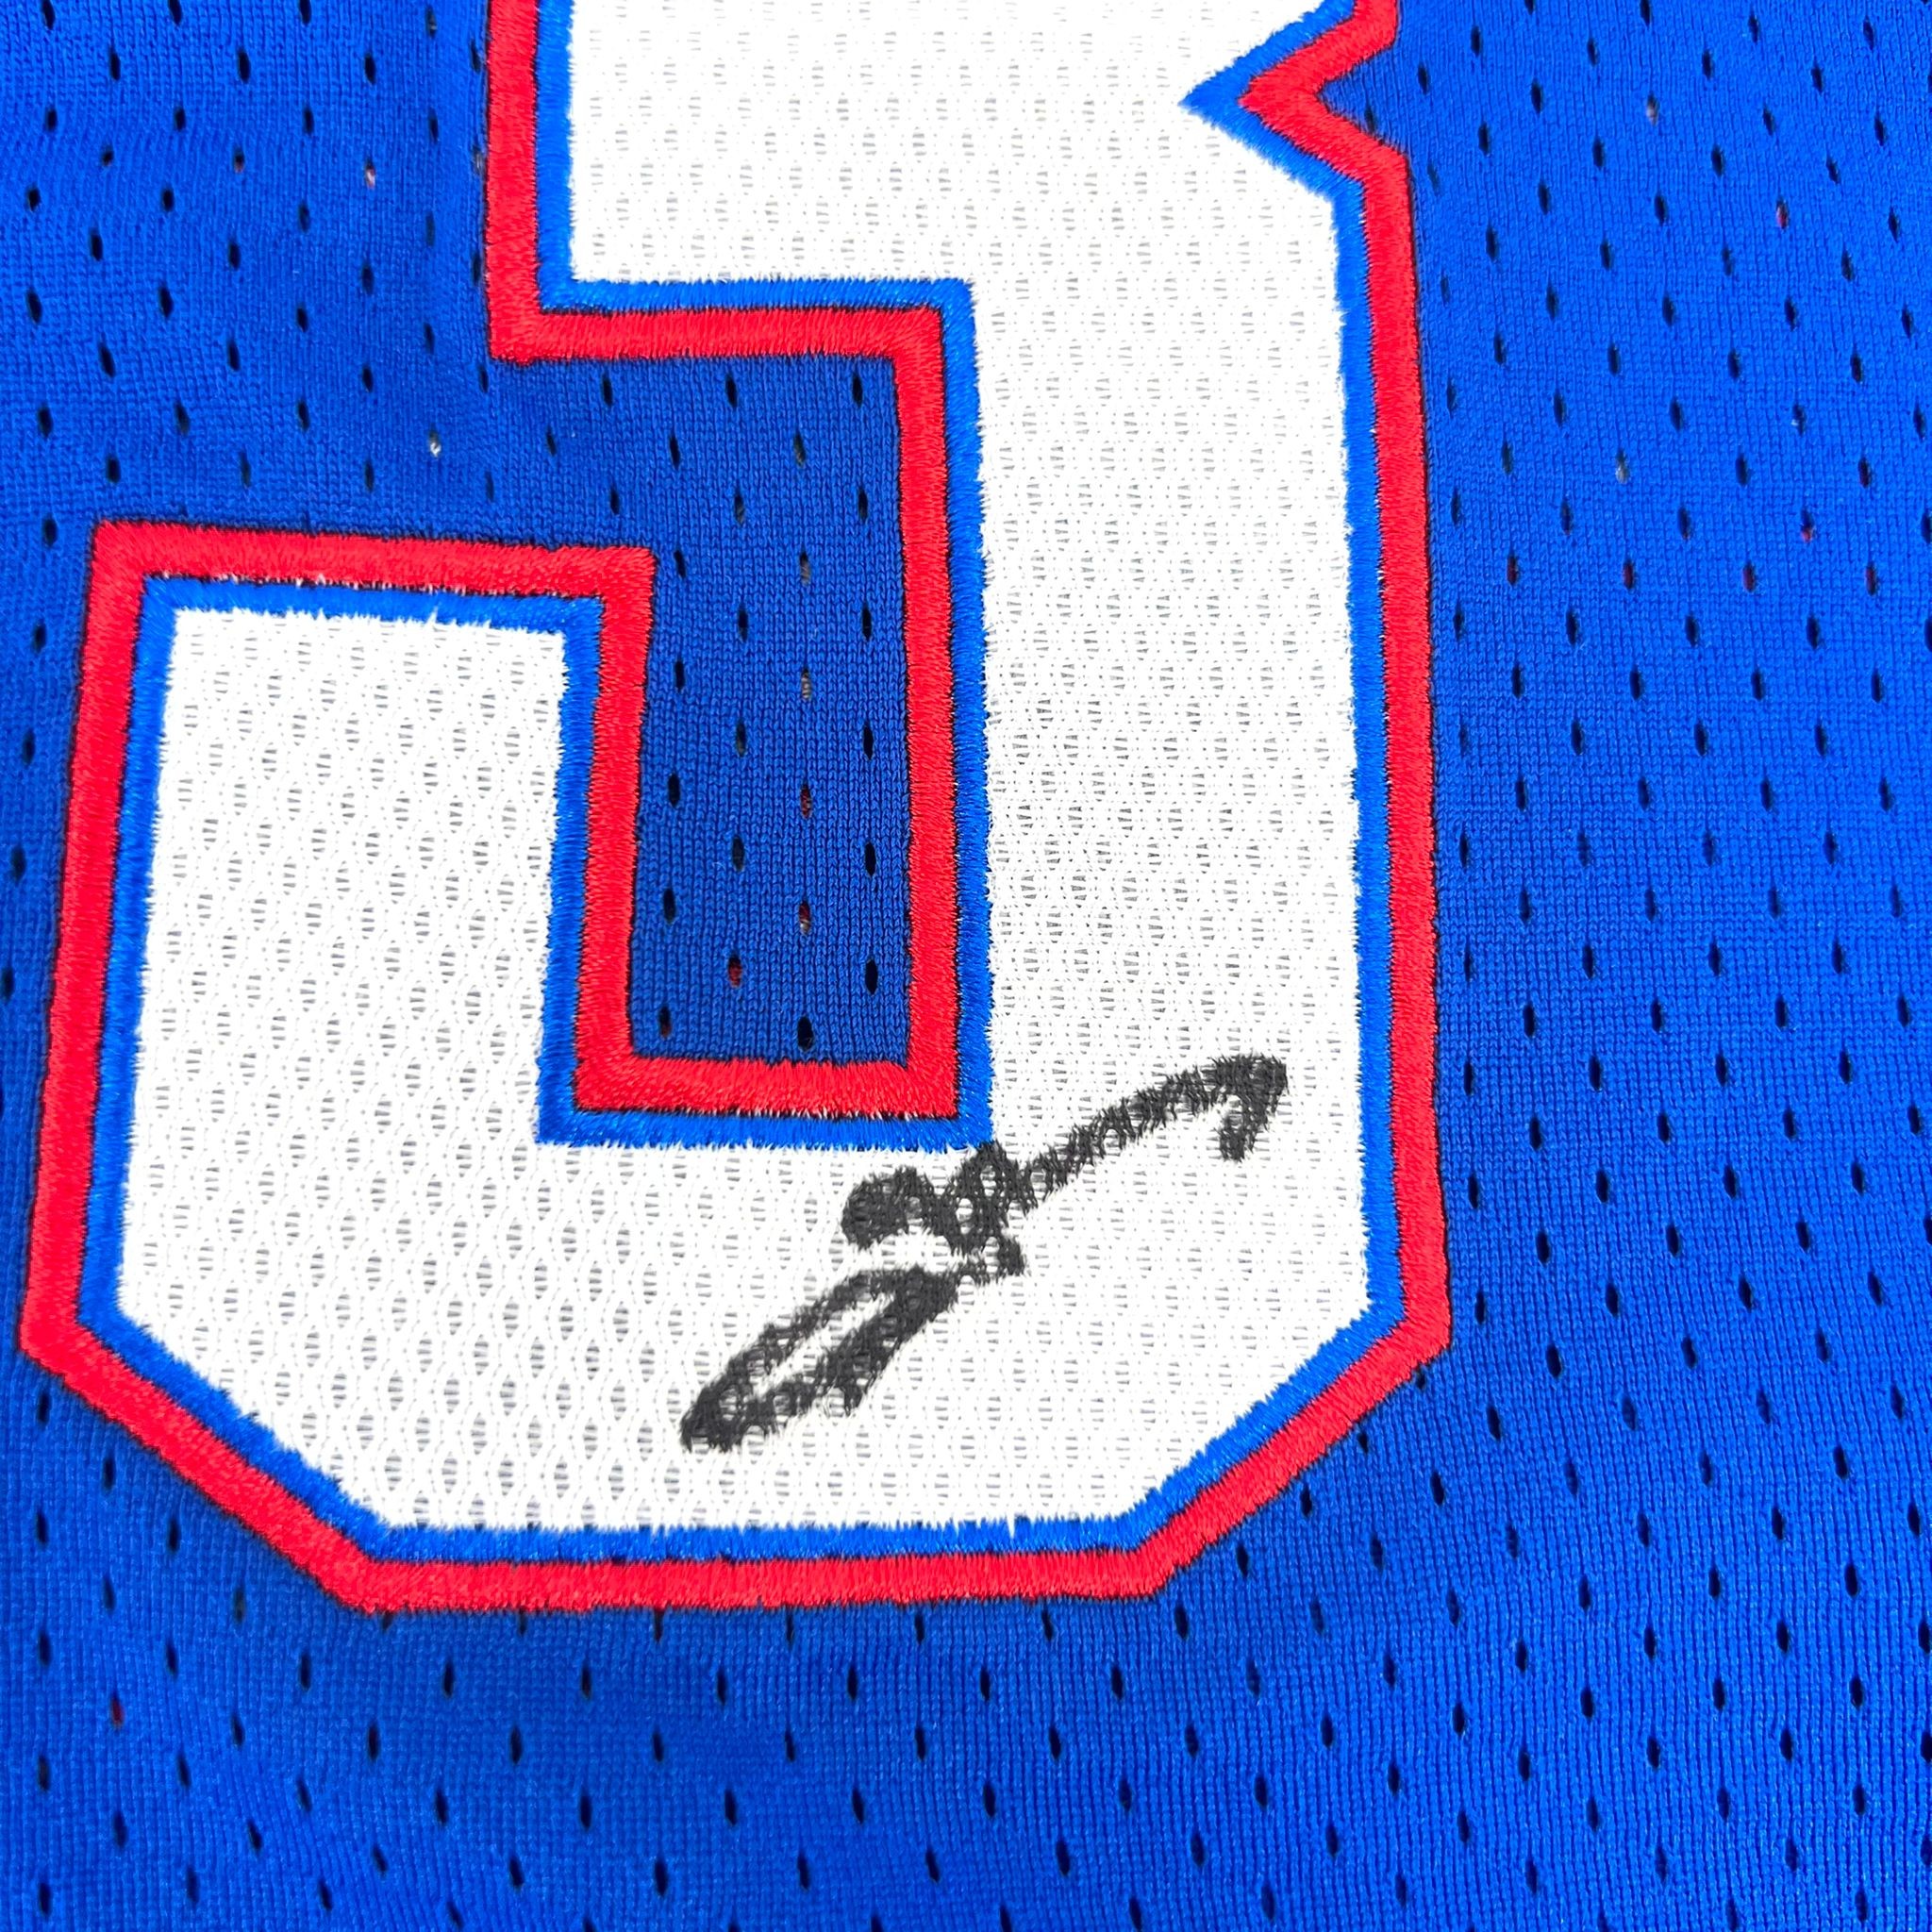 Allen Iverson Signed All-Star Jersey - CharityStars